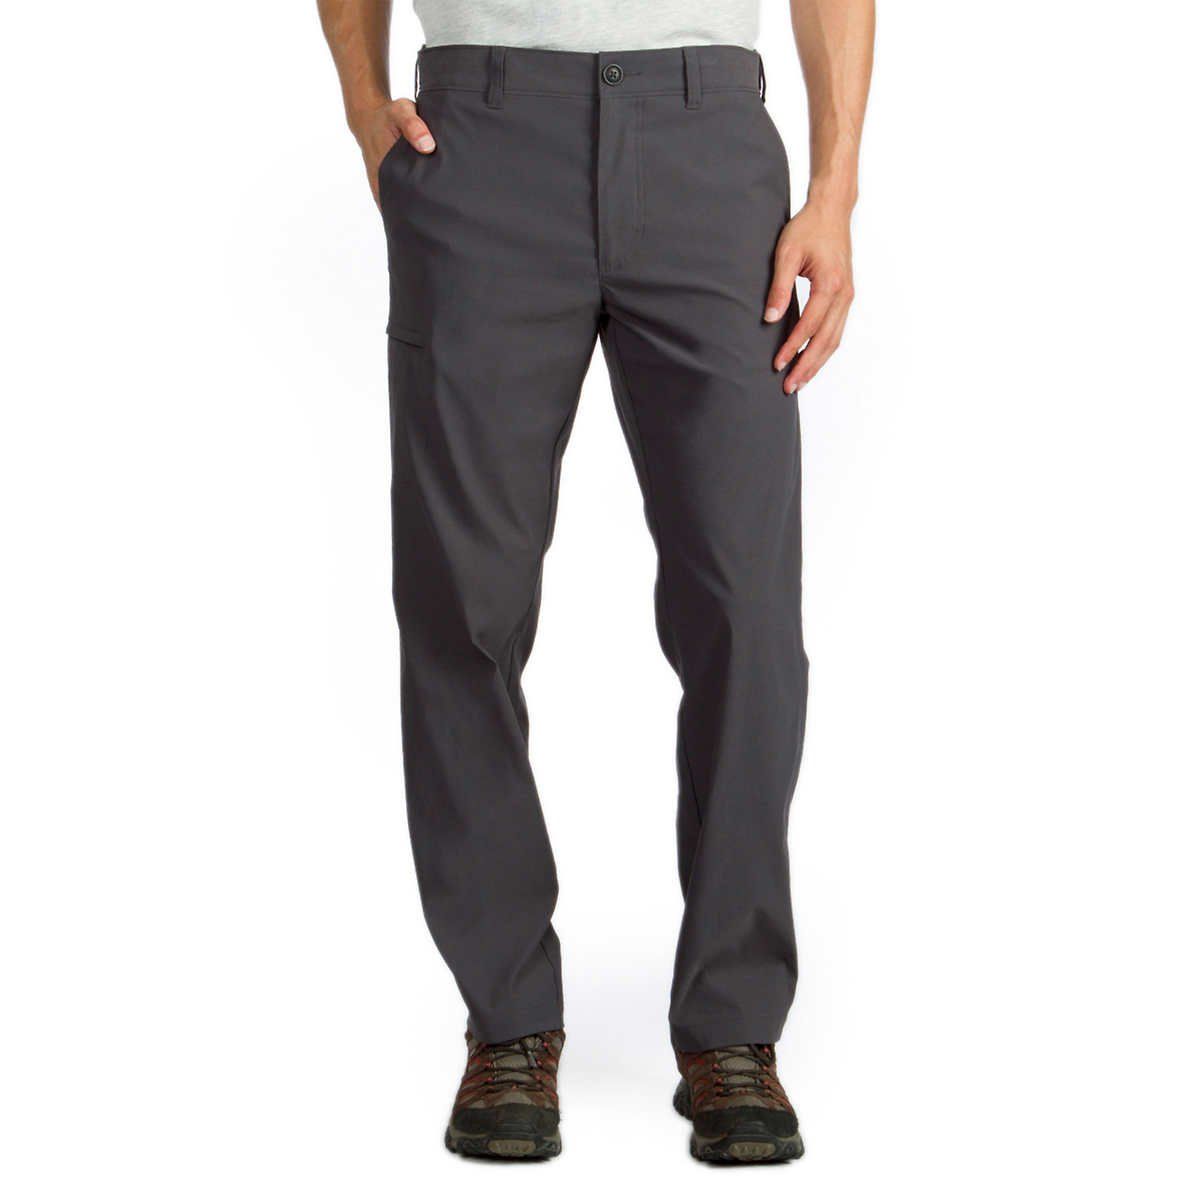 7 Best Travel Pants for Men Review Updated